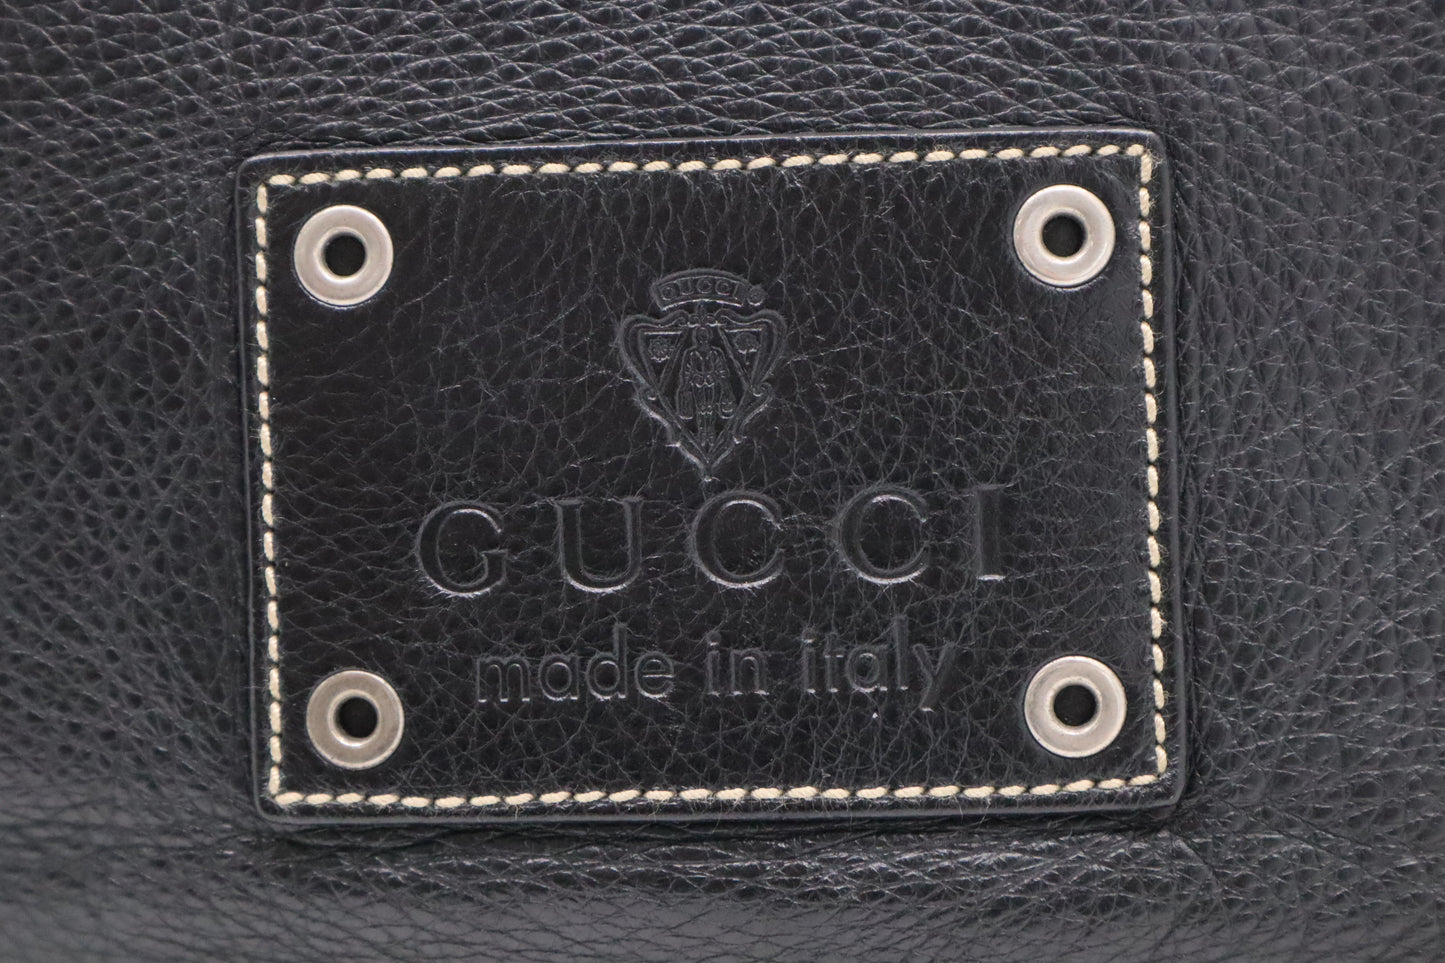 Gucci Crest Chain Messenger Bag in Black Leather